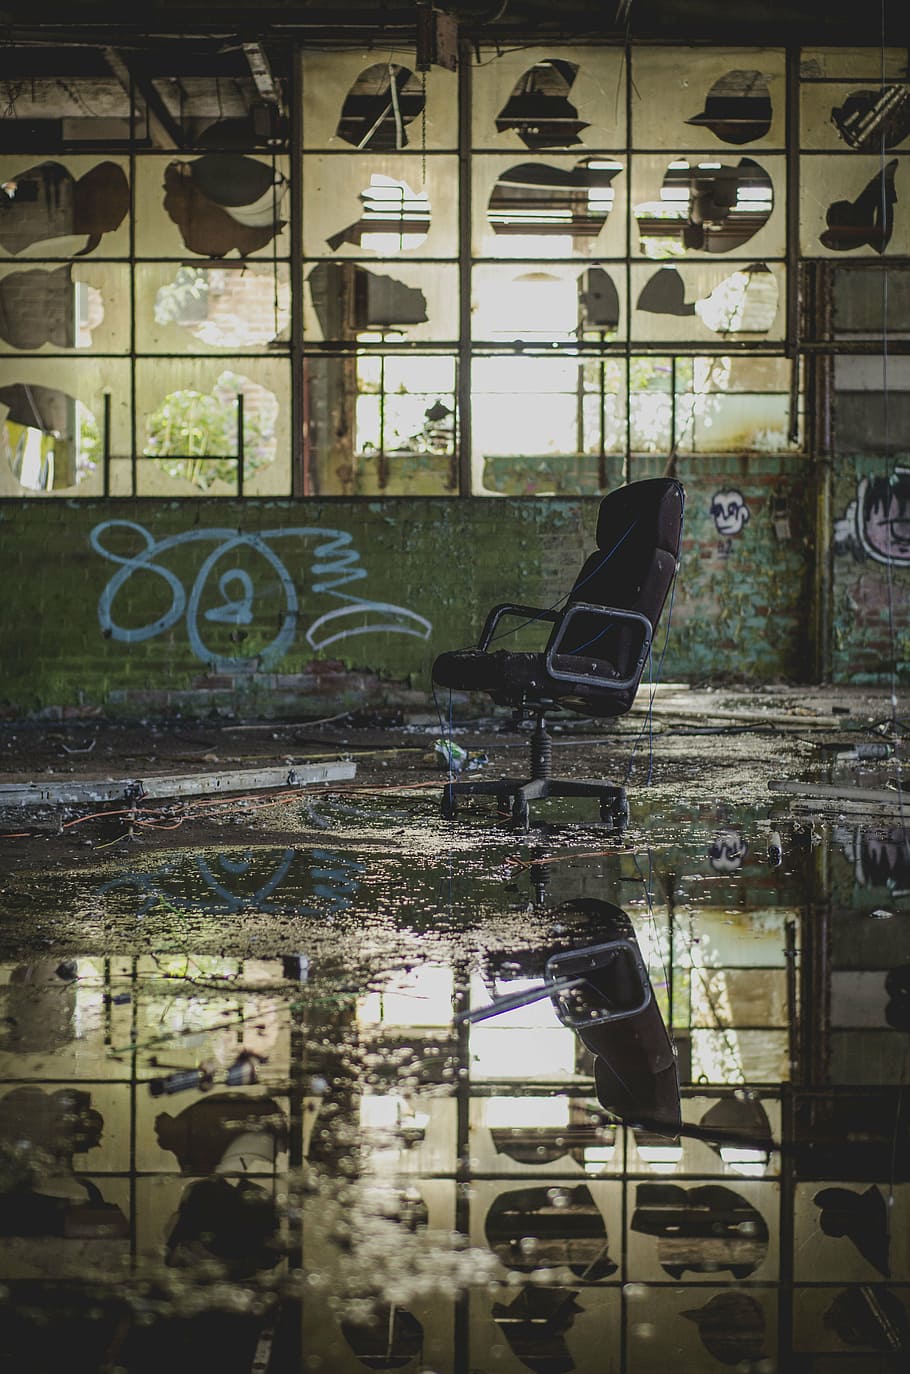 beige, black, abstract, painting, chair, reflection, water, flood, abandoned, building